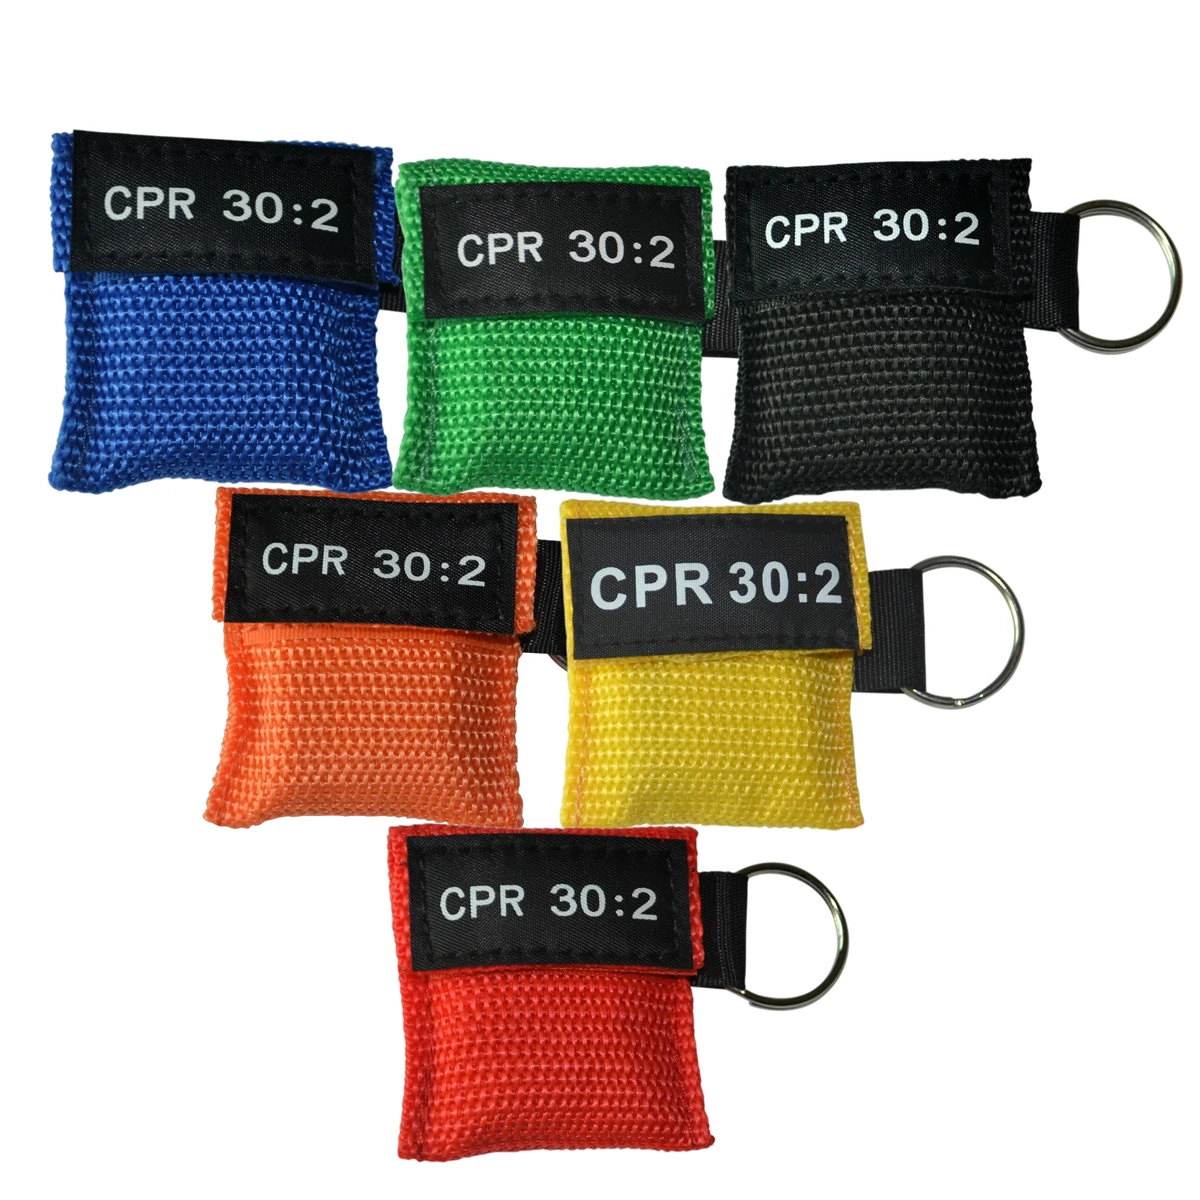 

10 Pcs/Pack New cpr Face Mask Resuscitator First AidTraining Mouth to Mouth Rescue Hygiene Face Shield 30:2 Portable